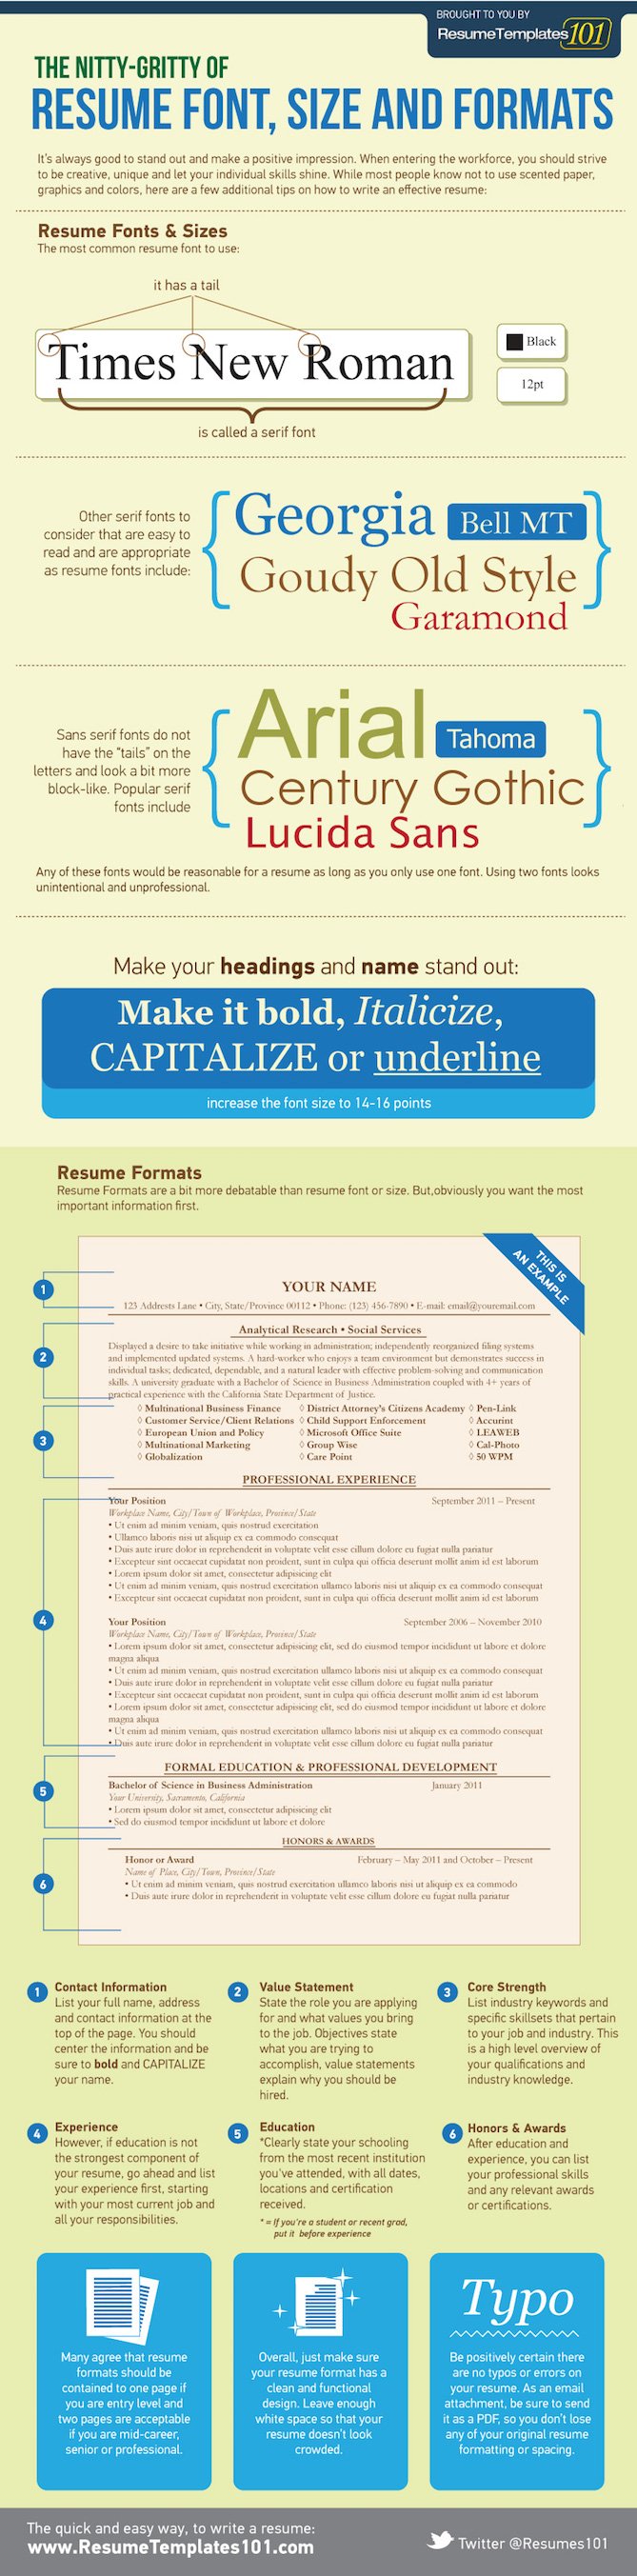 Infographic on how to format a resume using the best font type, font size, headings, and layout.